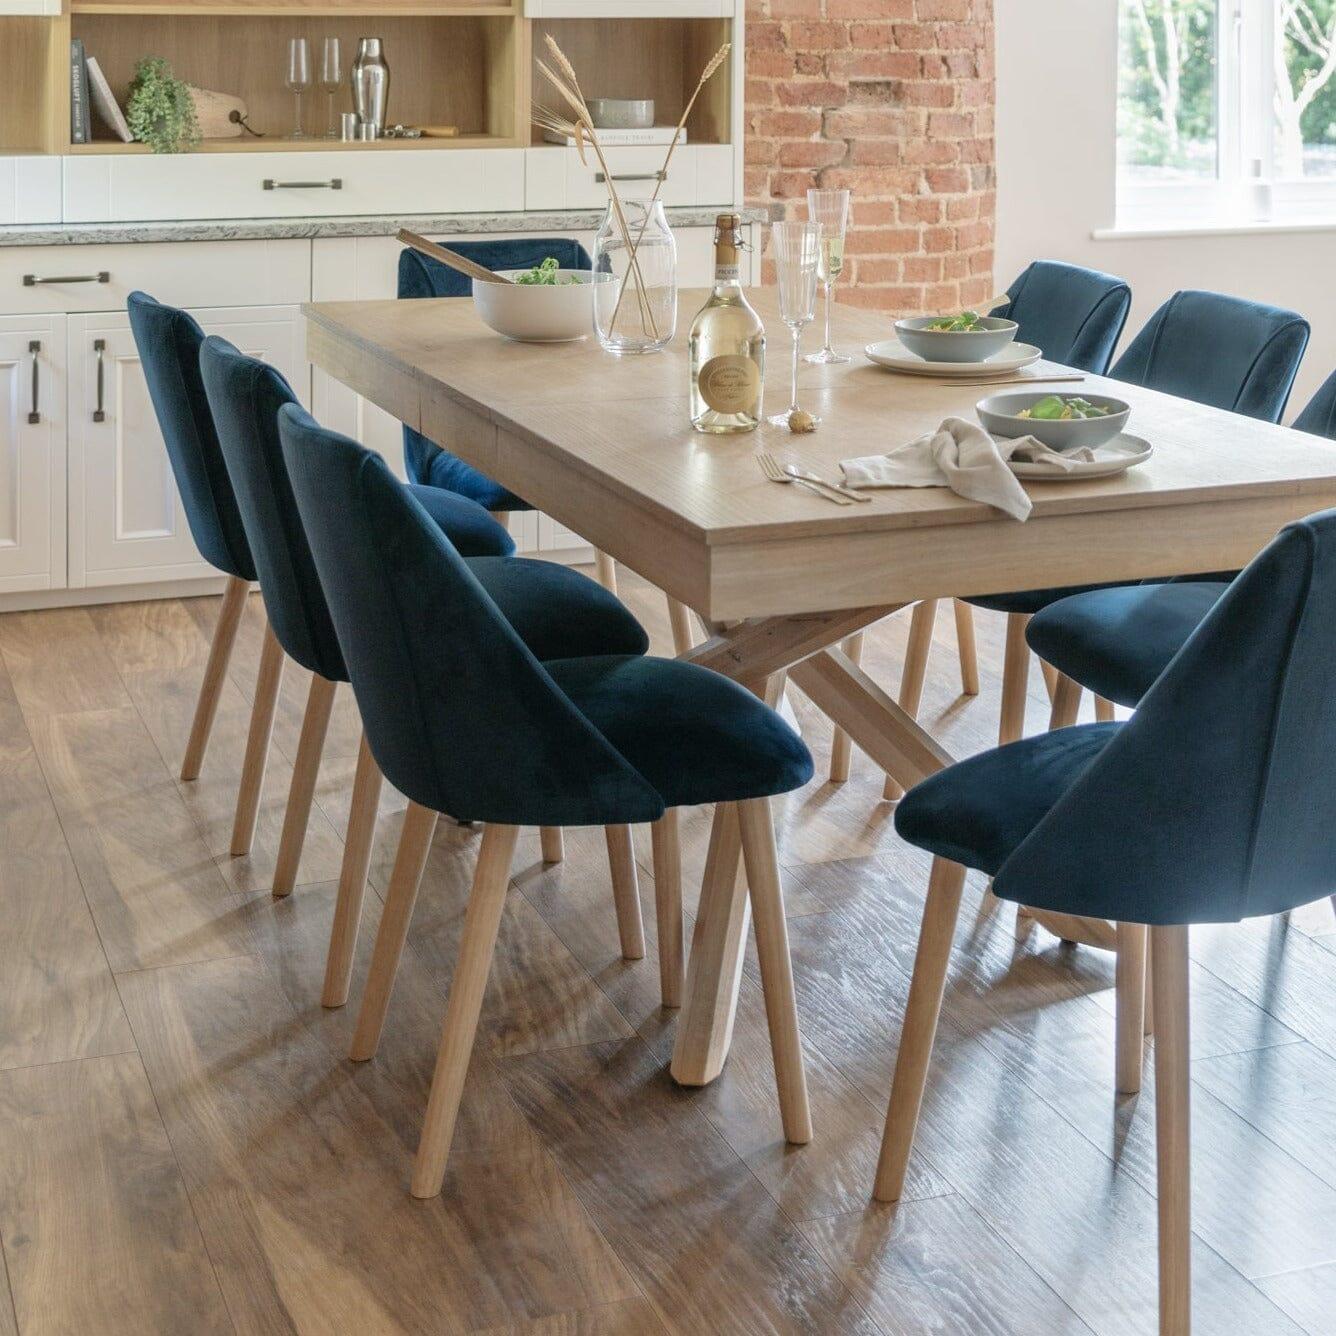 Freya dining chairs - set of 2 - blue velvet and pale oak - Laura James